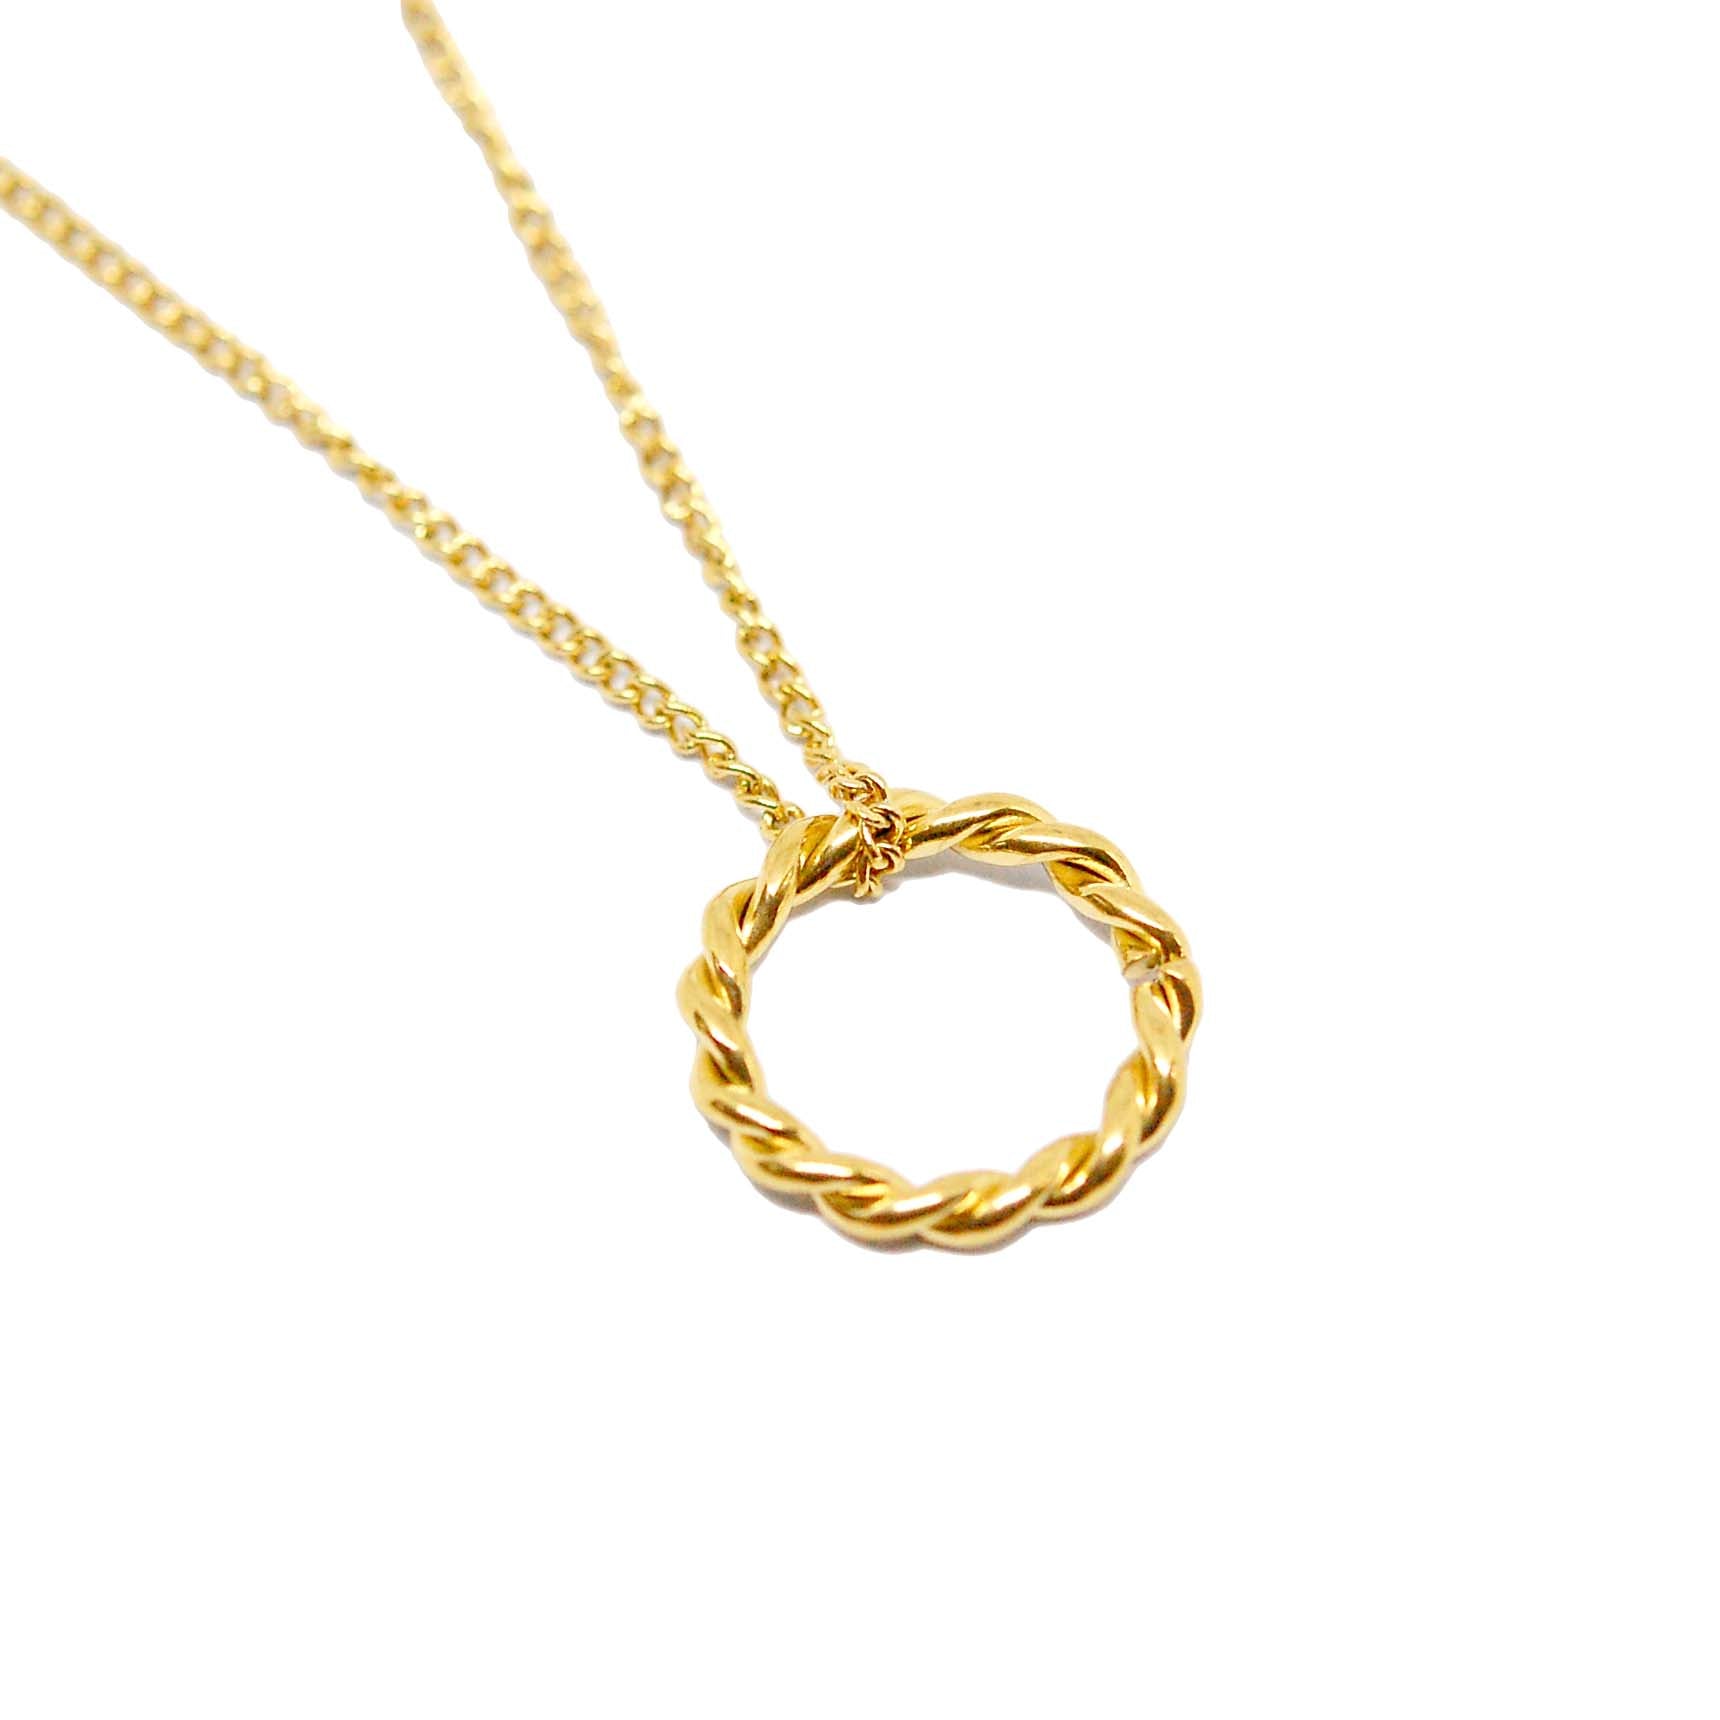 ESN 8069: All IPG 13mm Twisted Circle Outline Necklace w/ Tightly Wound 16"+2" Chain